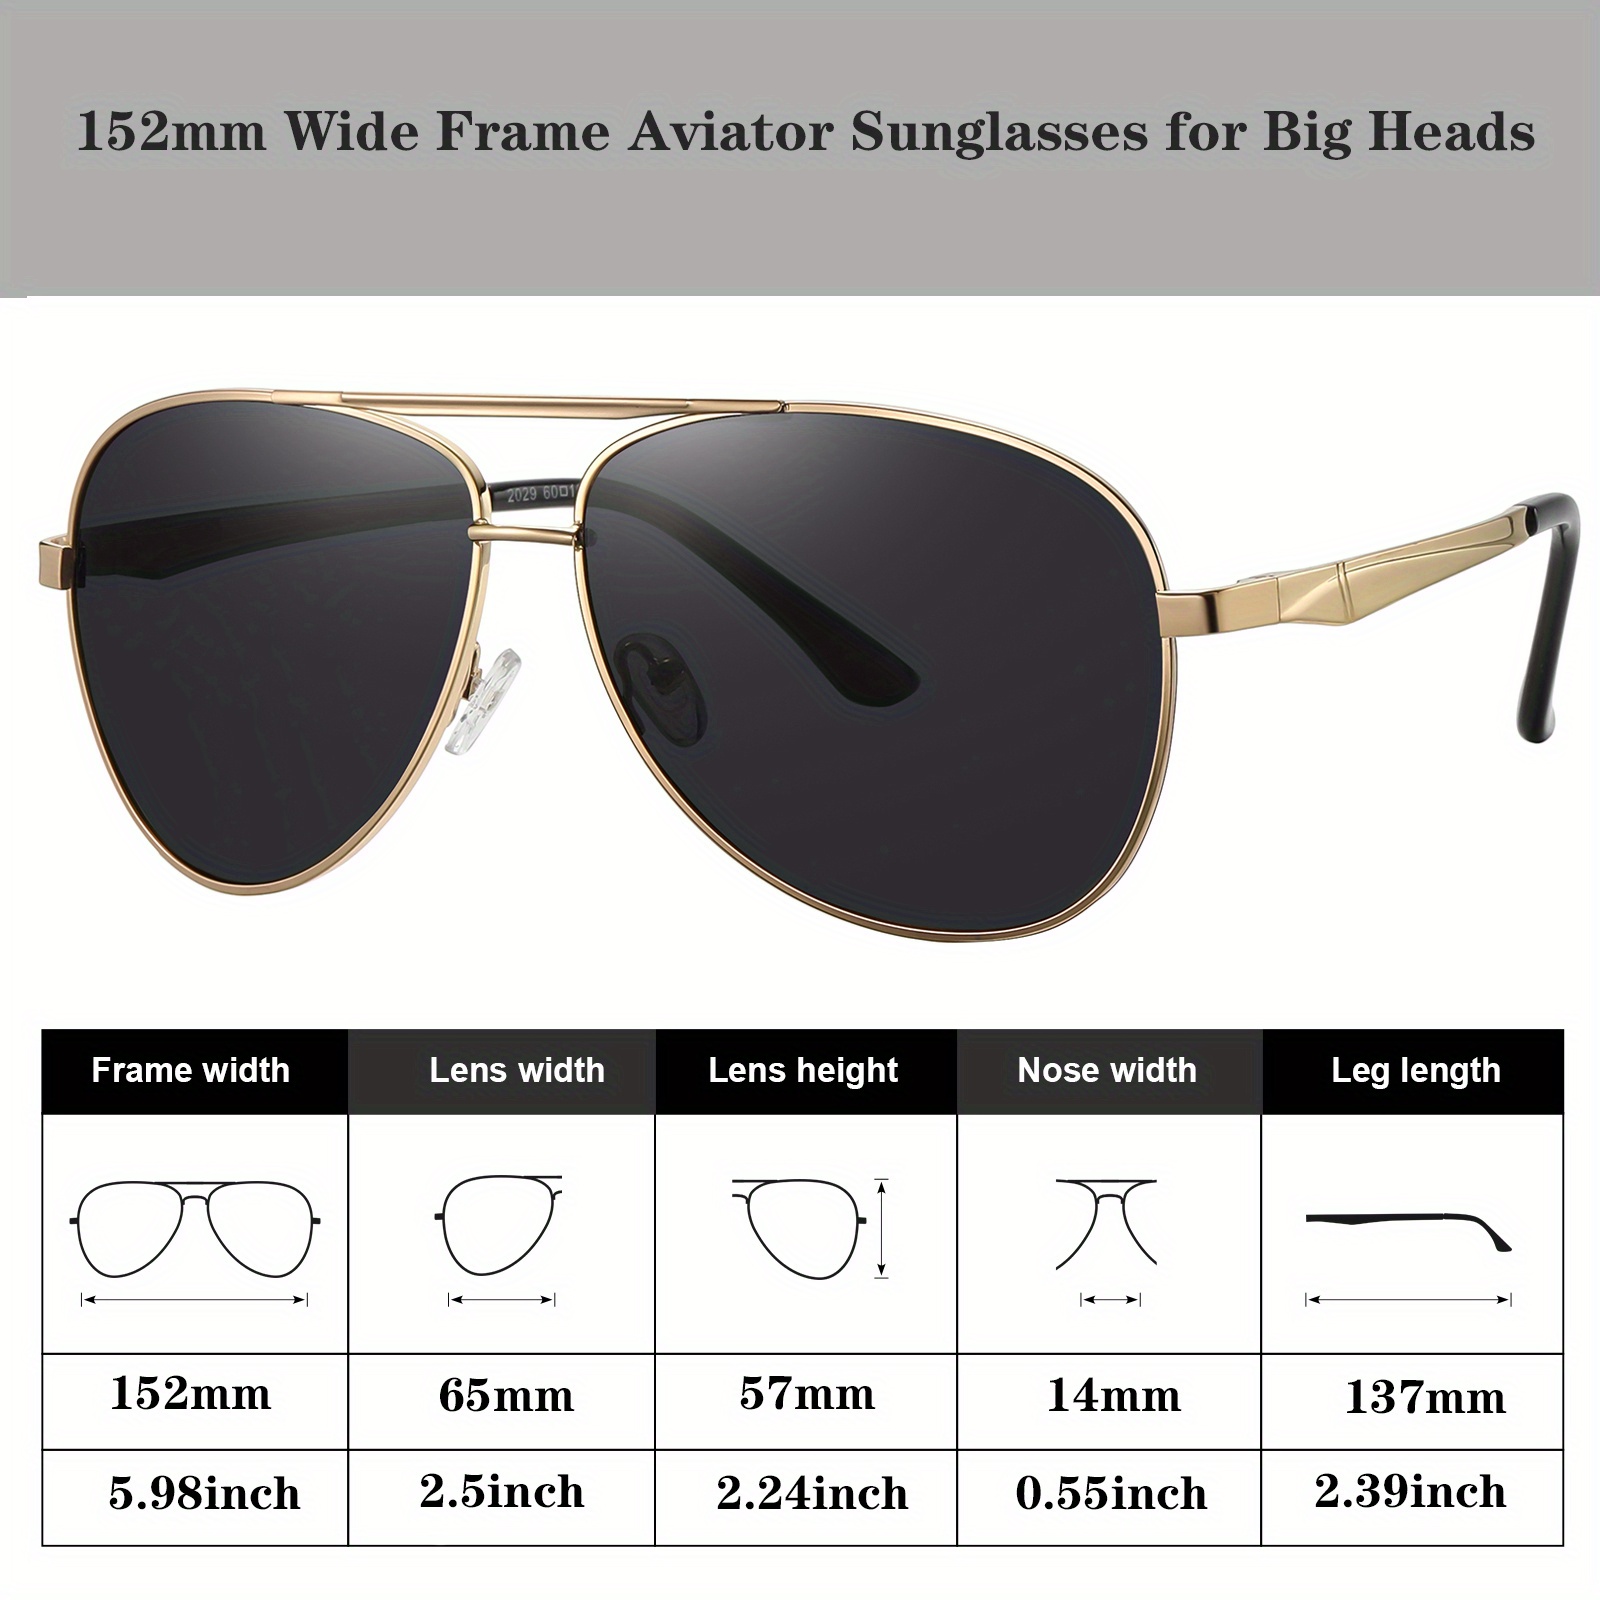 Big XL Wide Frame Extra Large Polarized Aviator Sunglasses, For Men Women  Outdoor Party Vacation Travel Driving Fishing Decors Photo Props, 2 Colors A